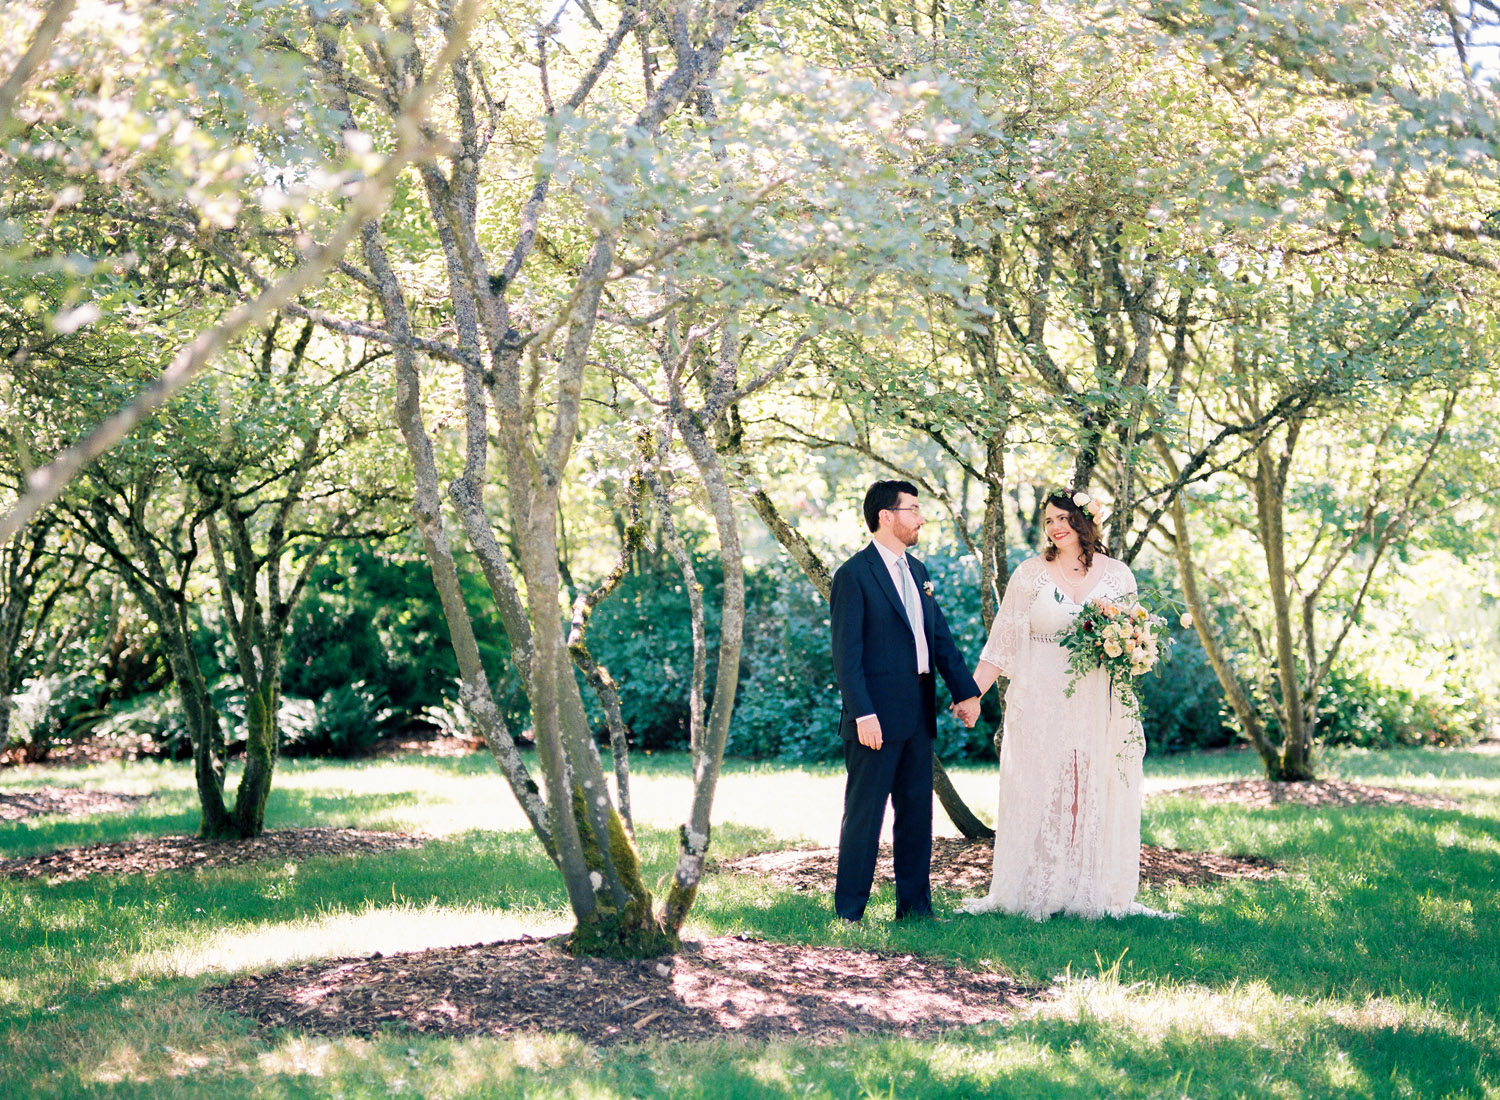 Boho Bride and Groom at the University of Washington Center for Urban Horticulture Summer wedding